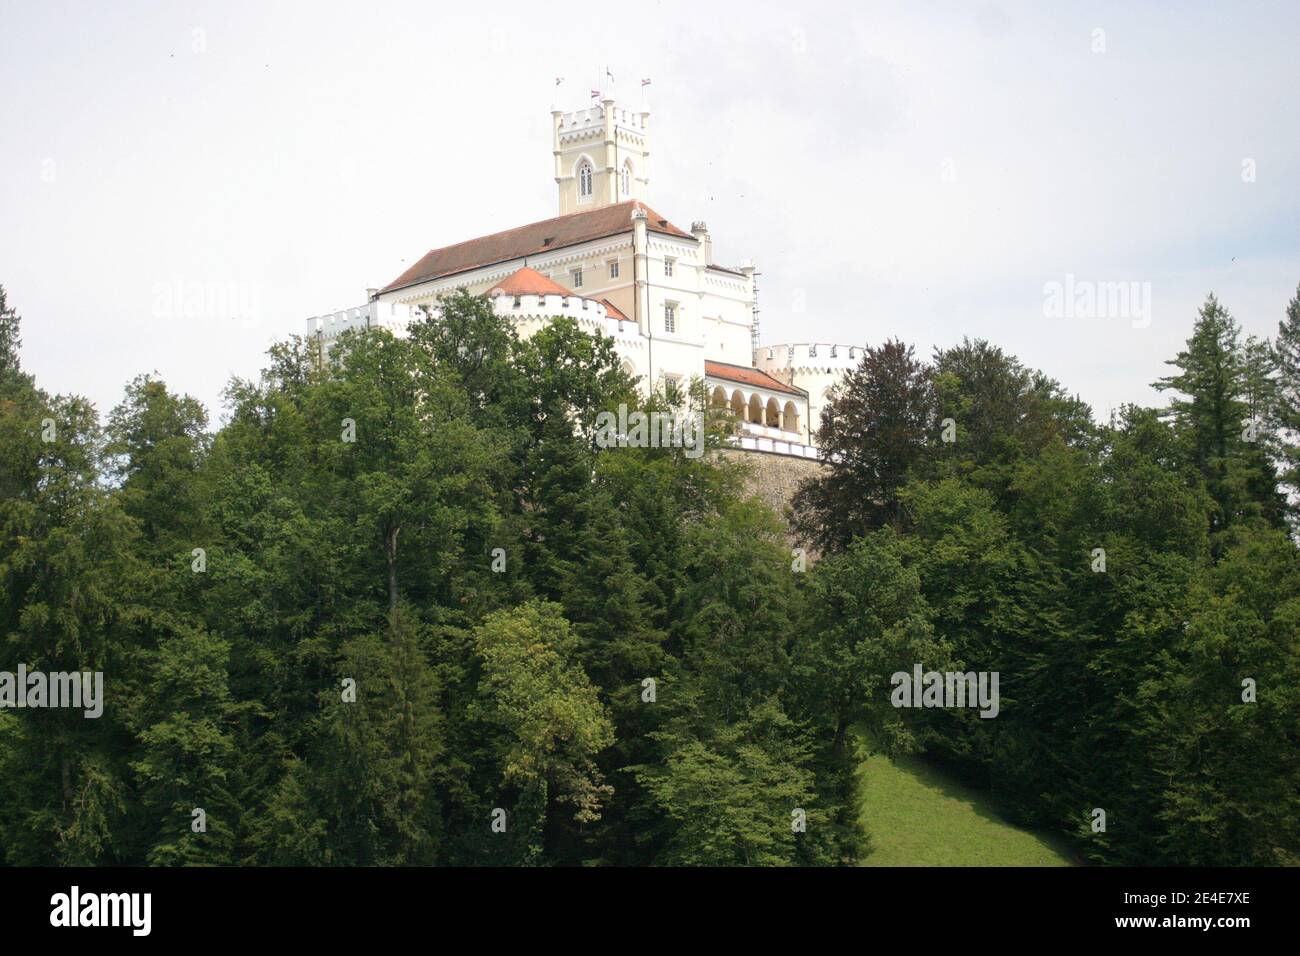 The 13th century Trakošćan battlement on the top of the hill, Varaždin County, Croatia, surrounded by thick forest Stock Photo